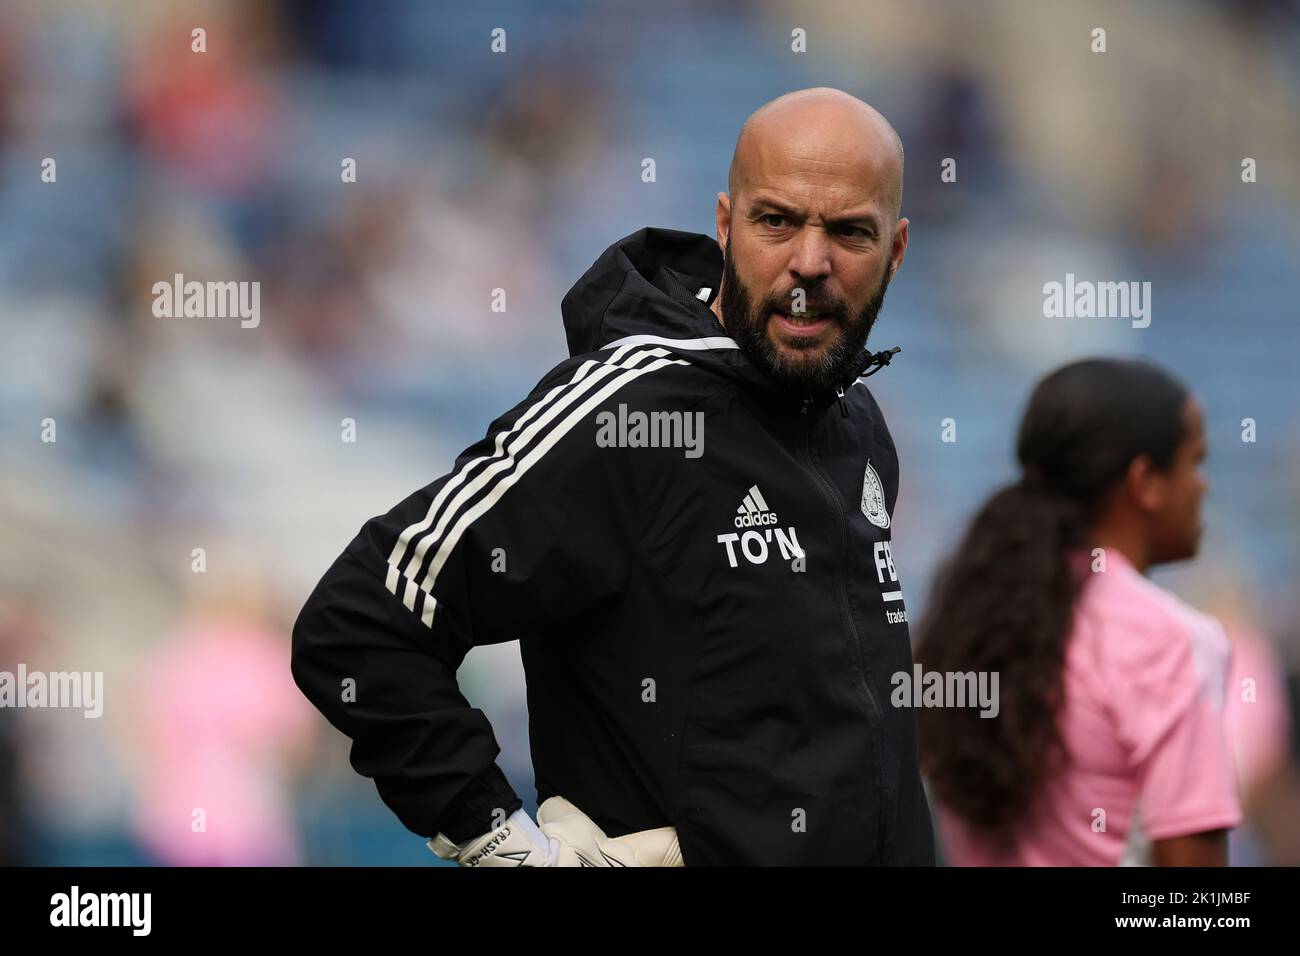 Leicester, UK. 18th Sep, 2022. Leicester, England, September 18th 2022: Tony ONeil (Goalkeeping Coach of Leicester City Women) looks on in the warmup prior to the Barclays FA Womens Super League game between Leicester City and Tottenham Hotspur at the King Power Stadium in Leicester, England. (James Holyoak/SPP) Credit: SPP Sport Press Photo. /Alamy Live News Stock Photo